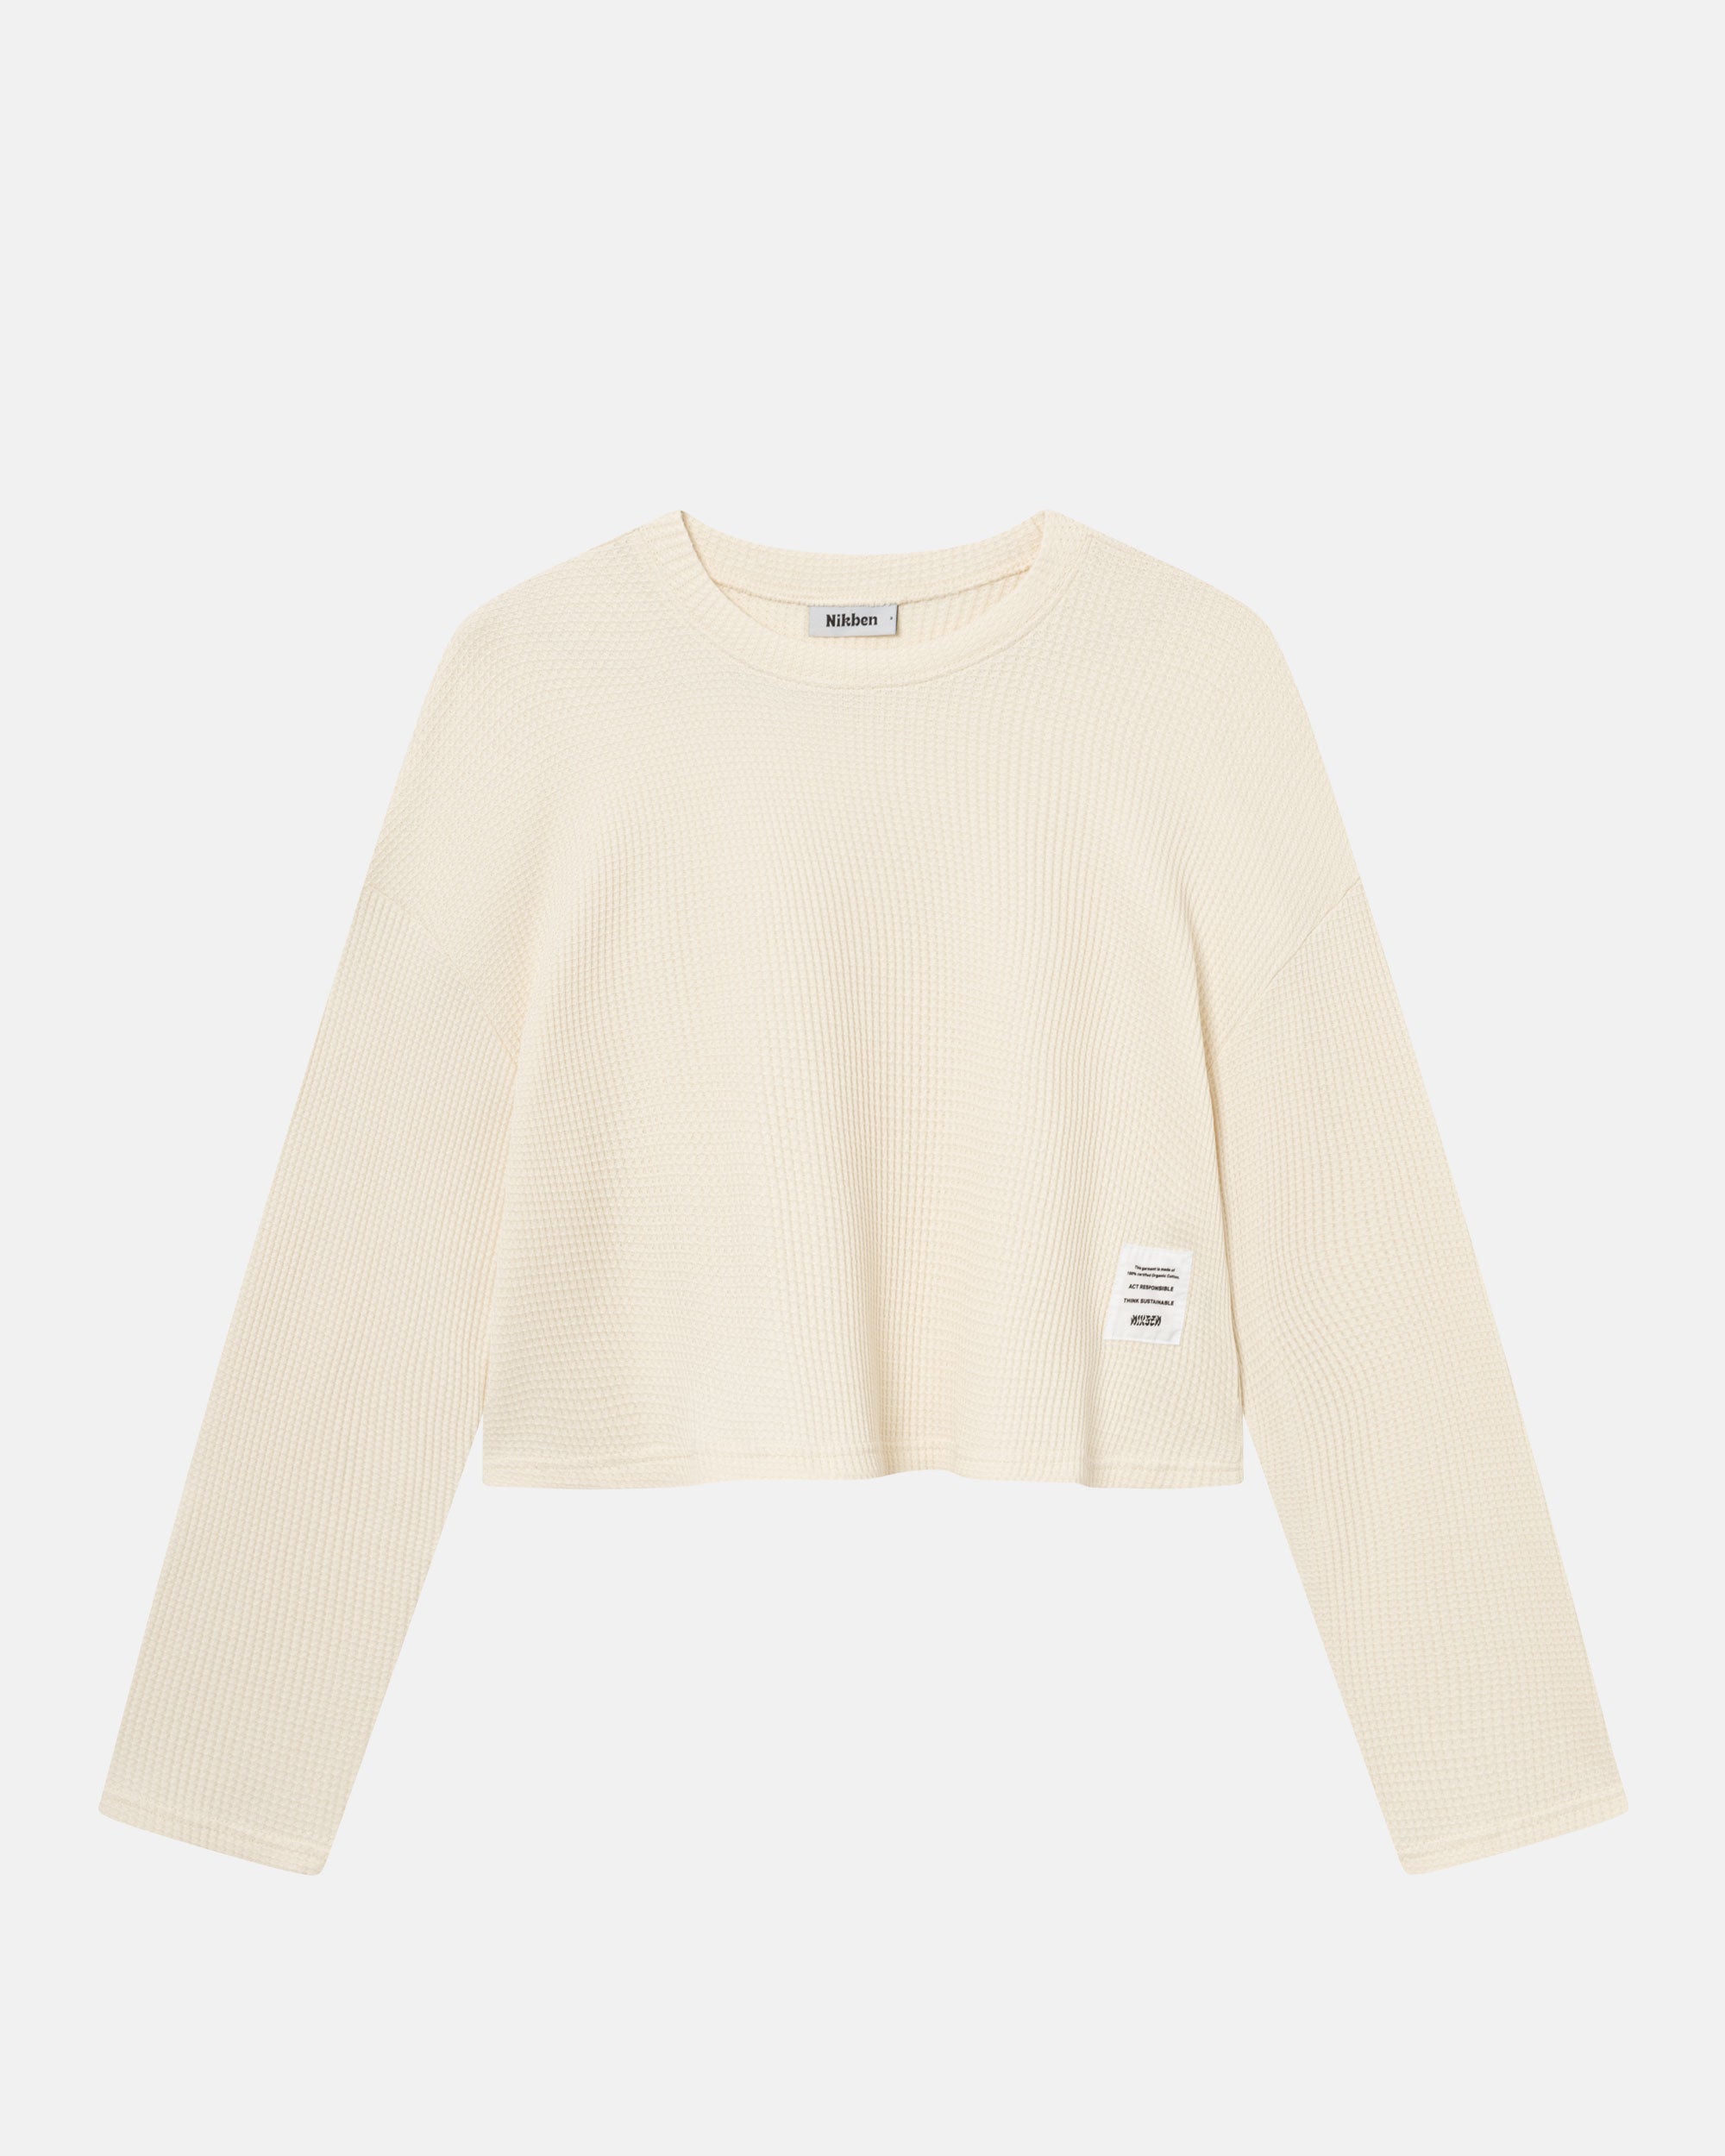 Off-white waffle-patterned cropped sweatshirt with a stitched-on material label.